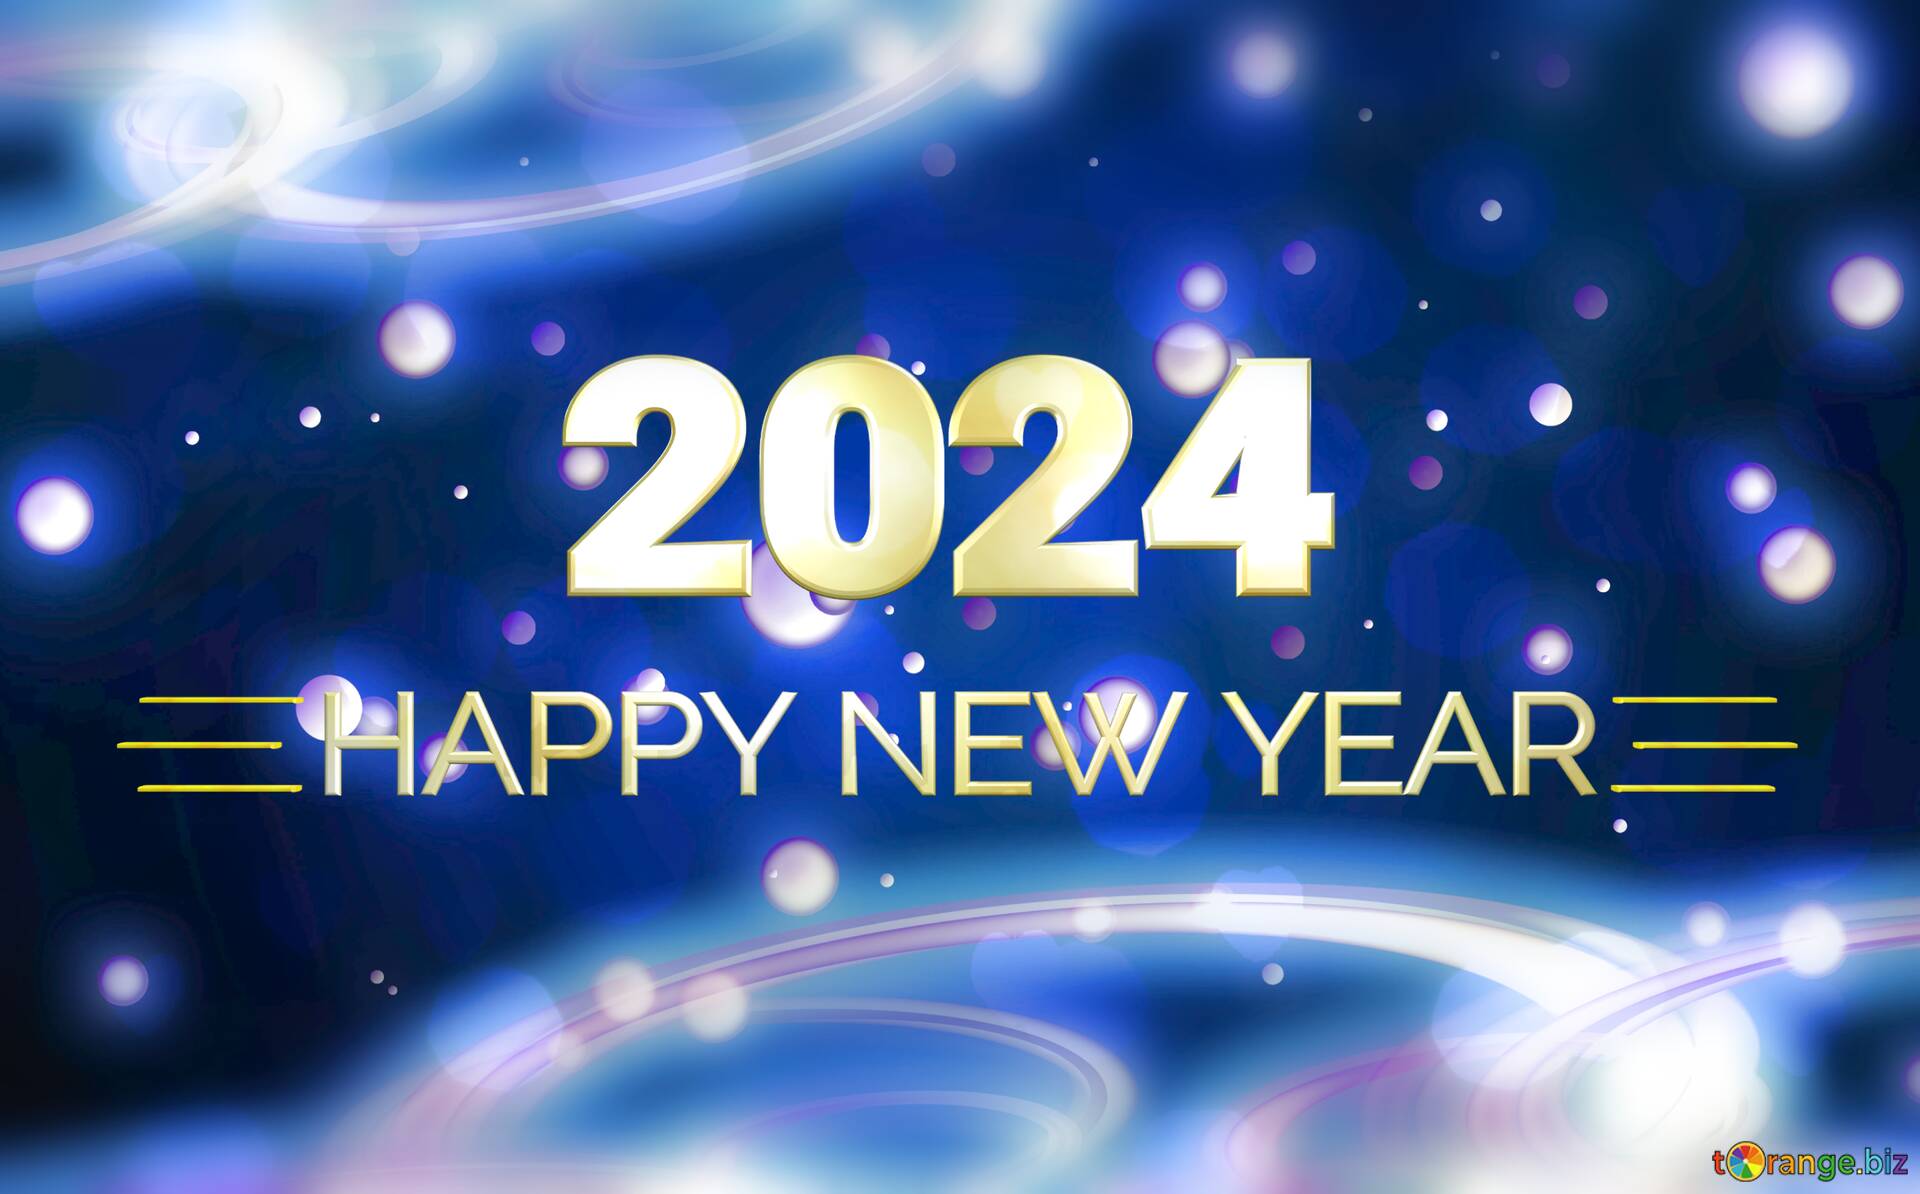 Happy New Year 2024 Wallpapers Wallpaper Cave